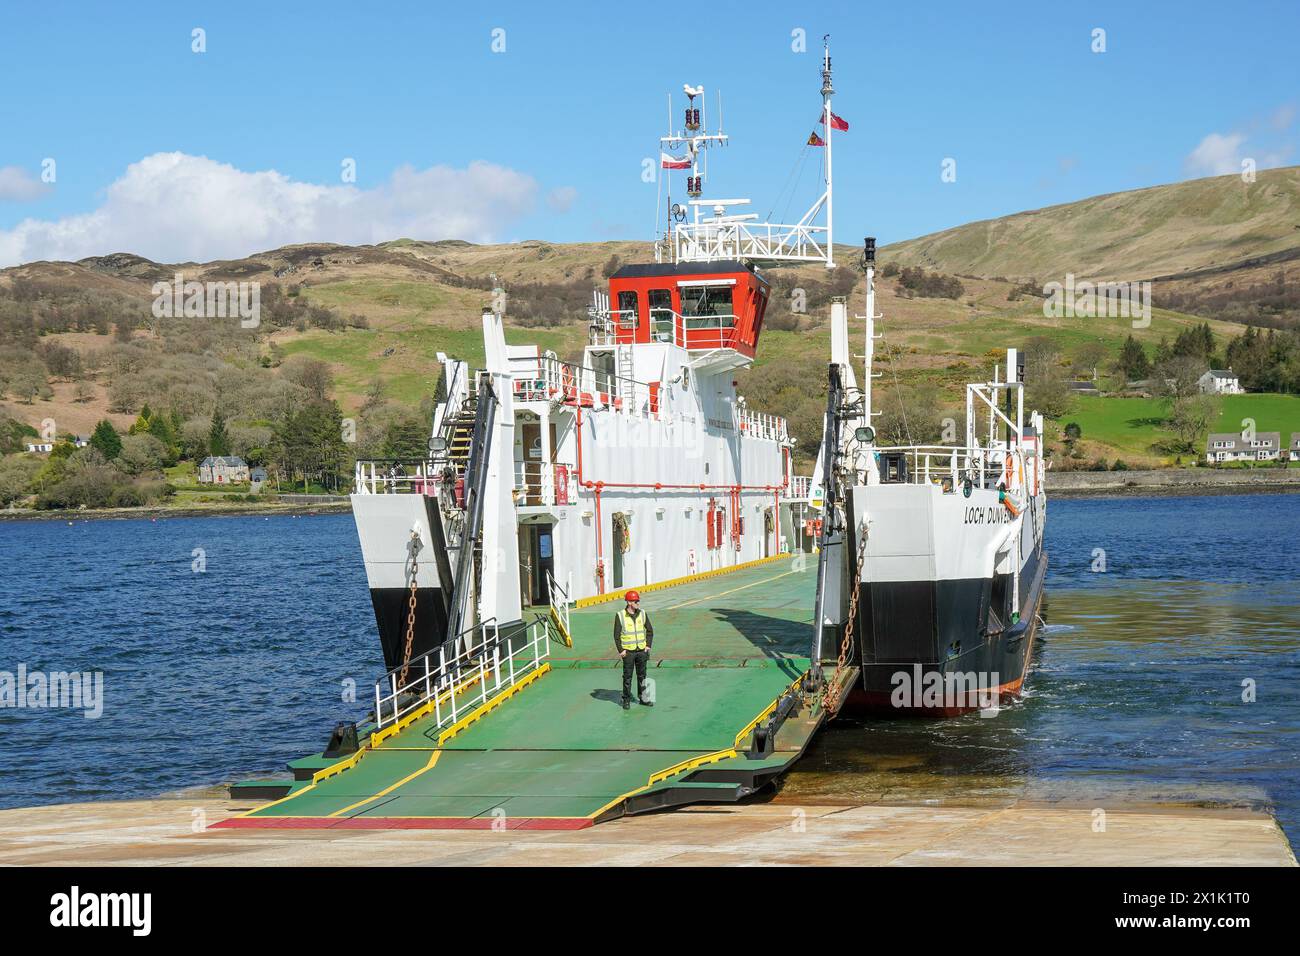 MV Loch Dunvegan, small Ro-Ro ferry operated by Caledonian MacBrayne, entered service on 13 May 1991. Stock Photo